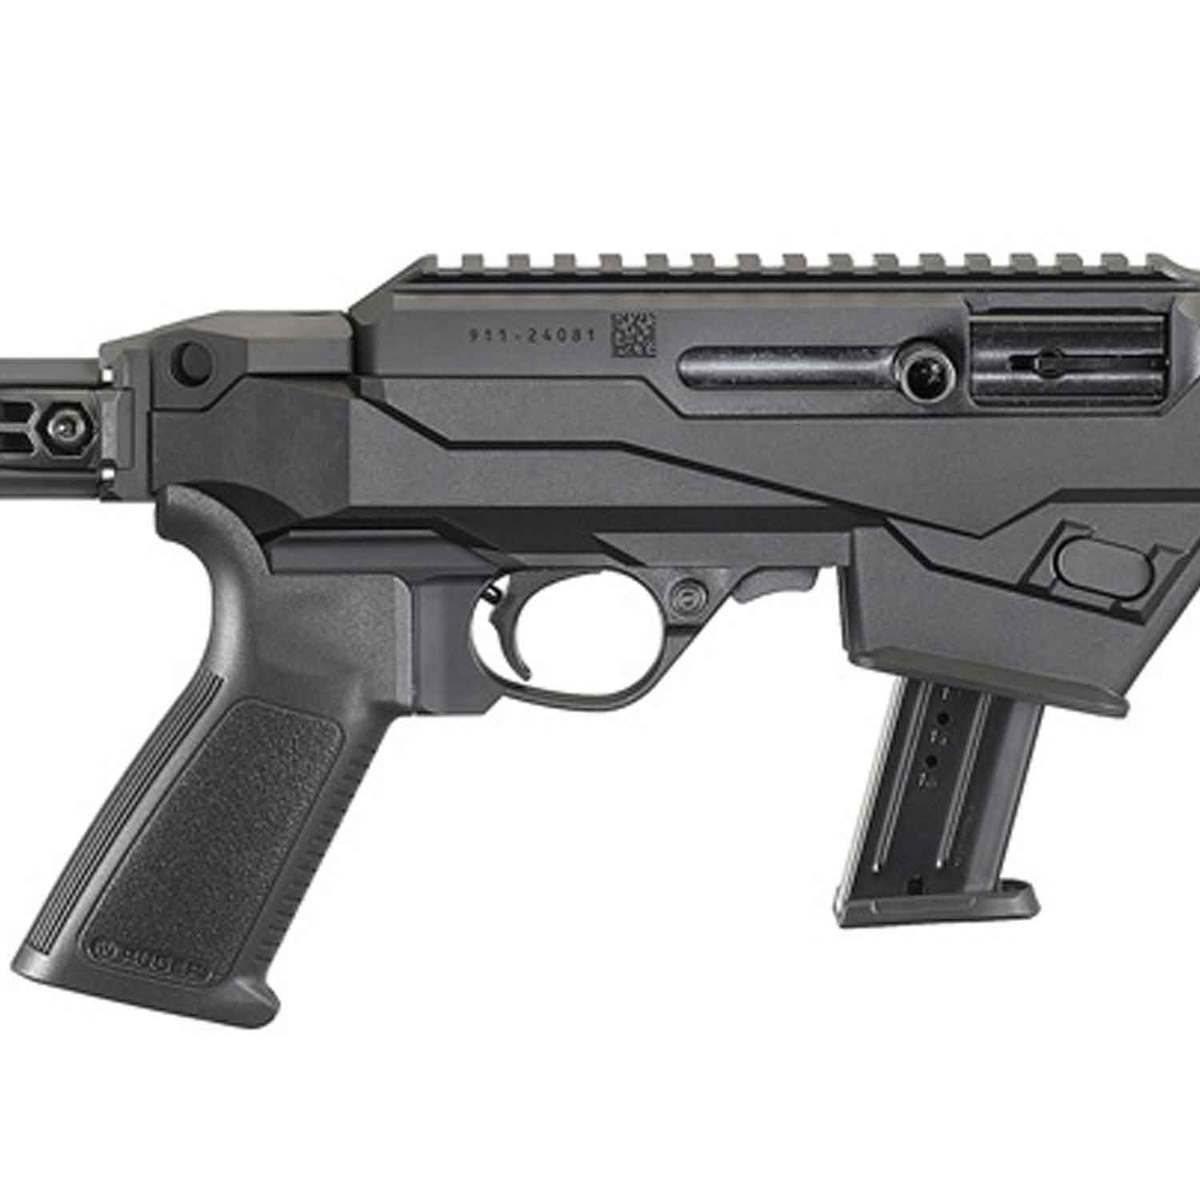 Ruger PC Carbine 9mm Luger 16.12in Black Semi Automatic Rifle - 17+1 Rounds